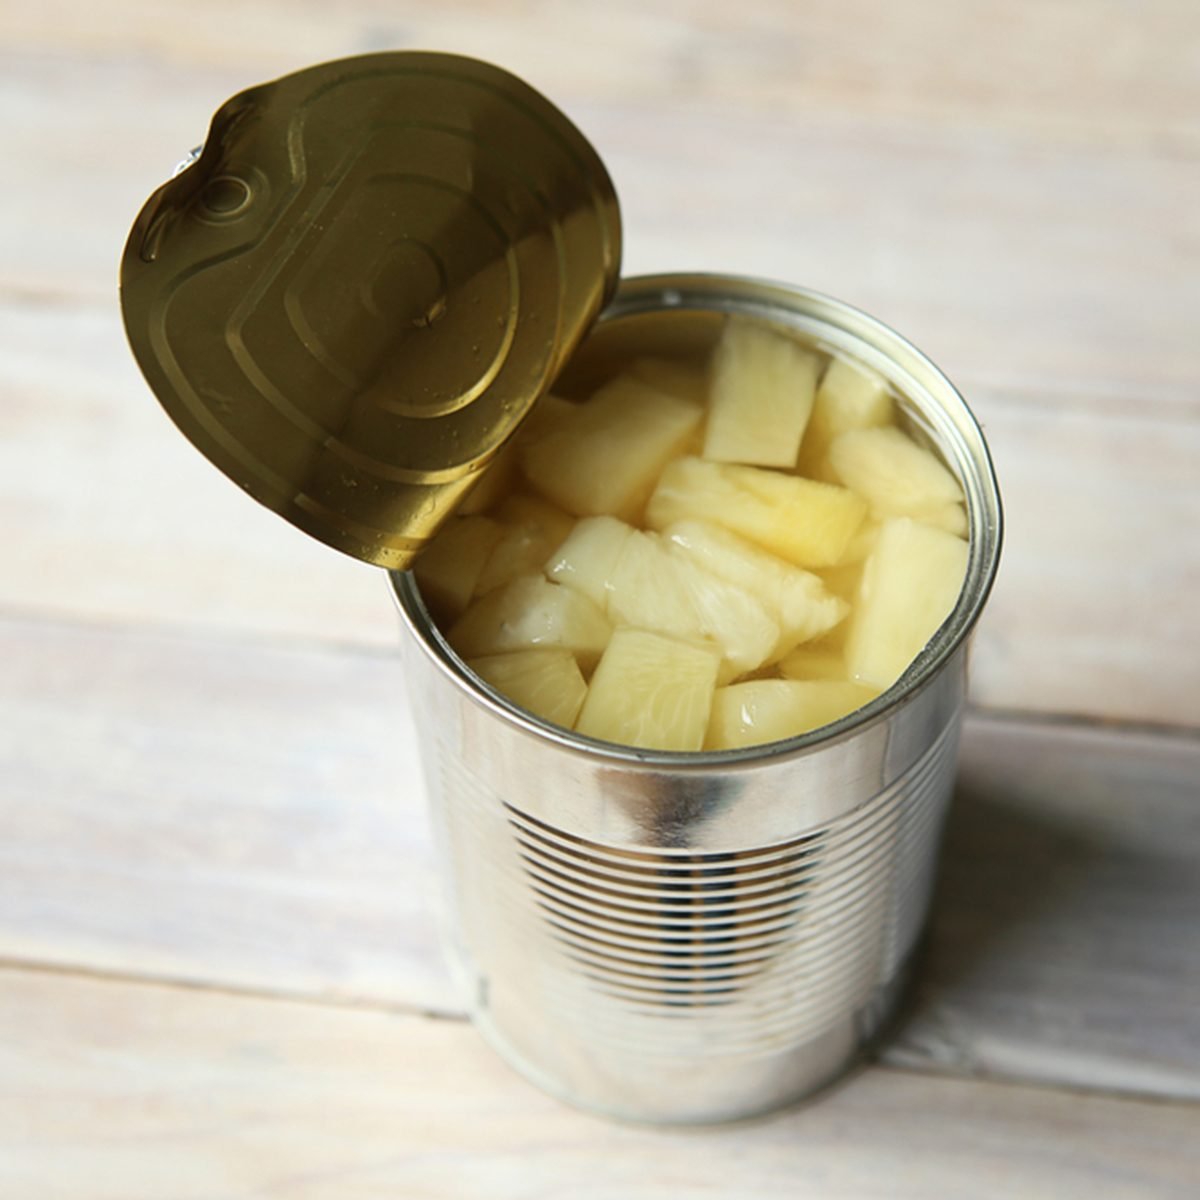 Are tinned fruit & vegetables good for you?